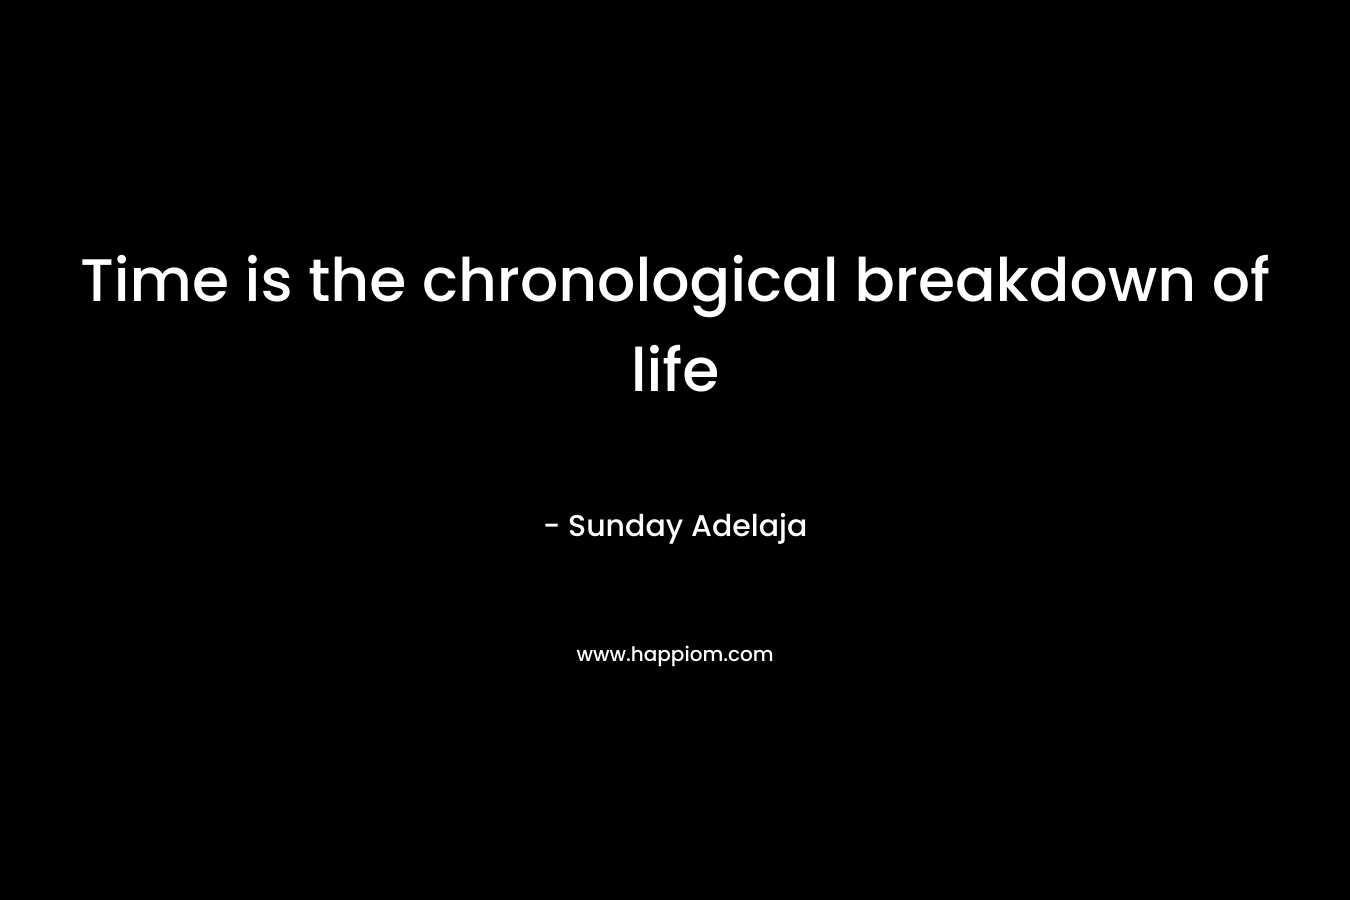 Time is the chronological breakdown of life